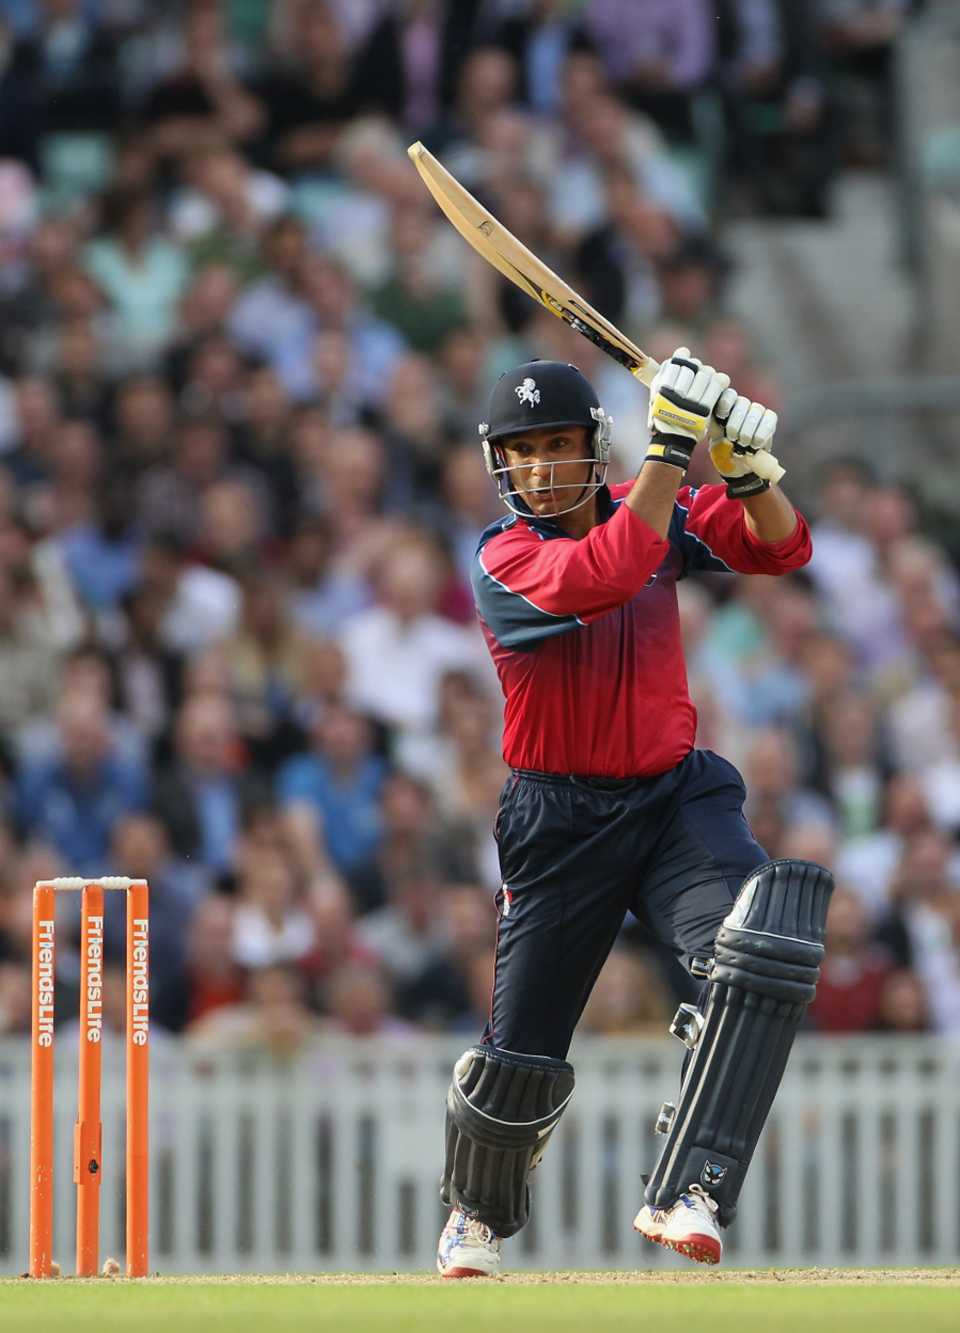 Azhar Mahmood cracks the ball through the off-side during his 60, Friends Life t20, The Oval, July 14 2011